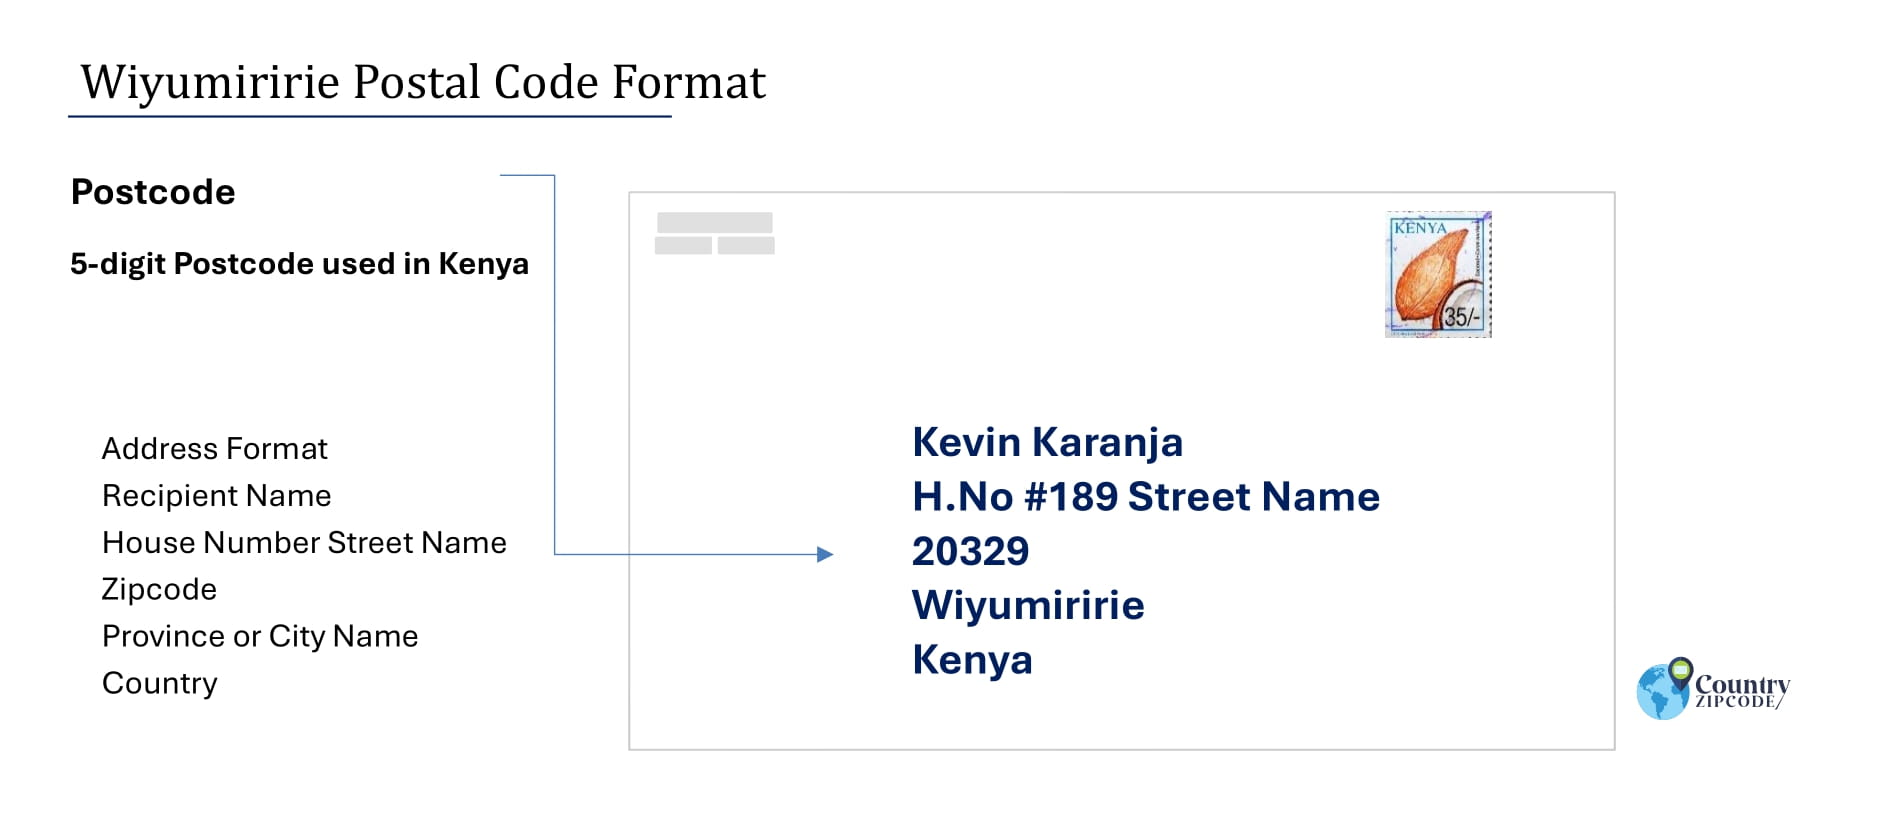 Example of Wiyumiririe Address and postal code format